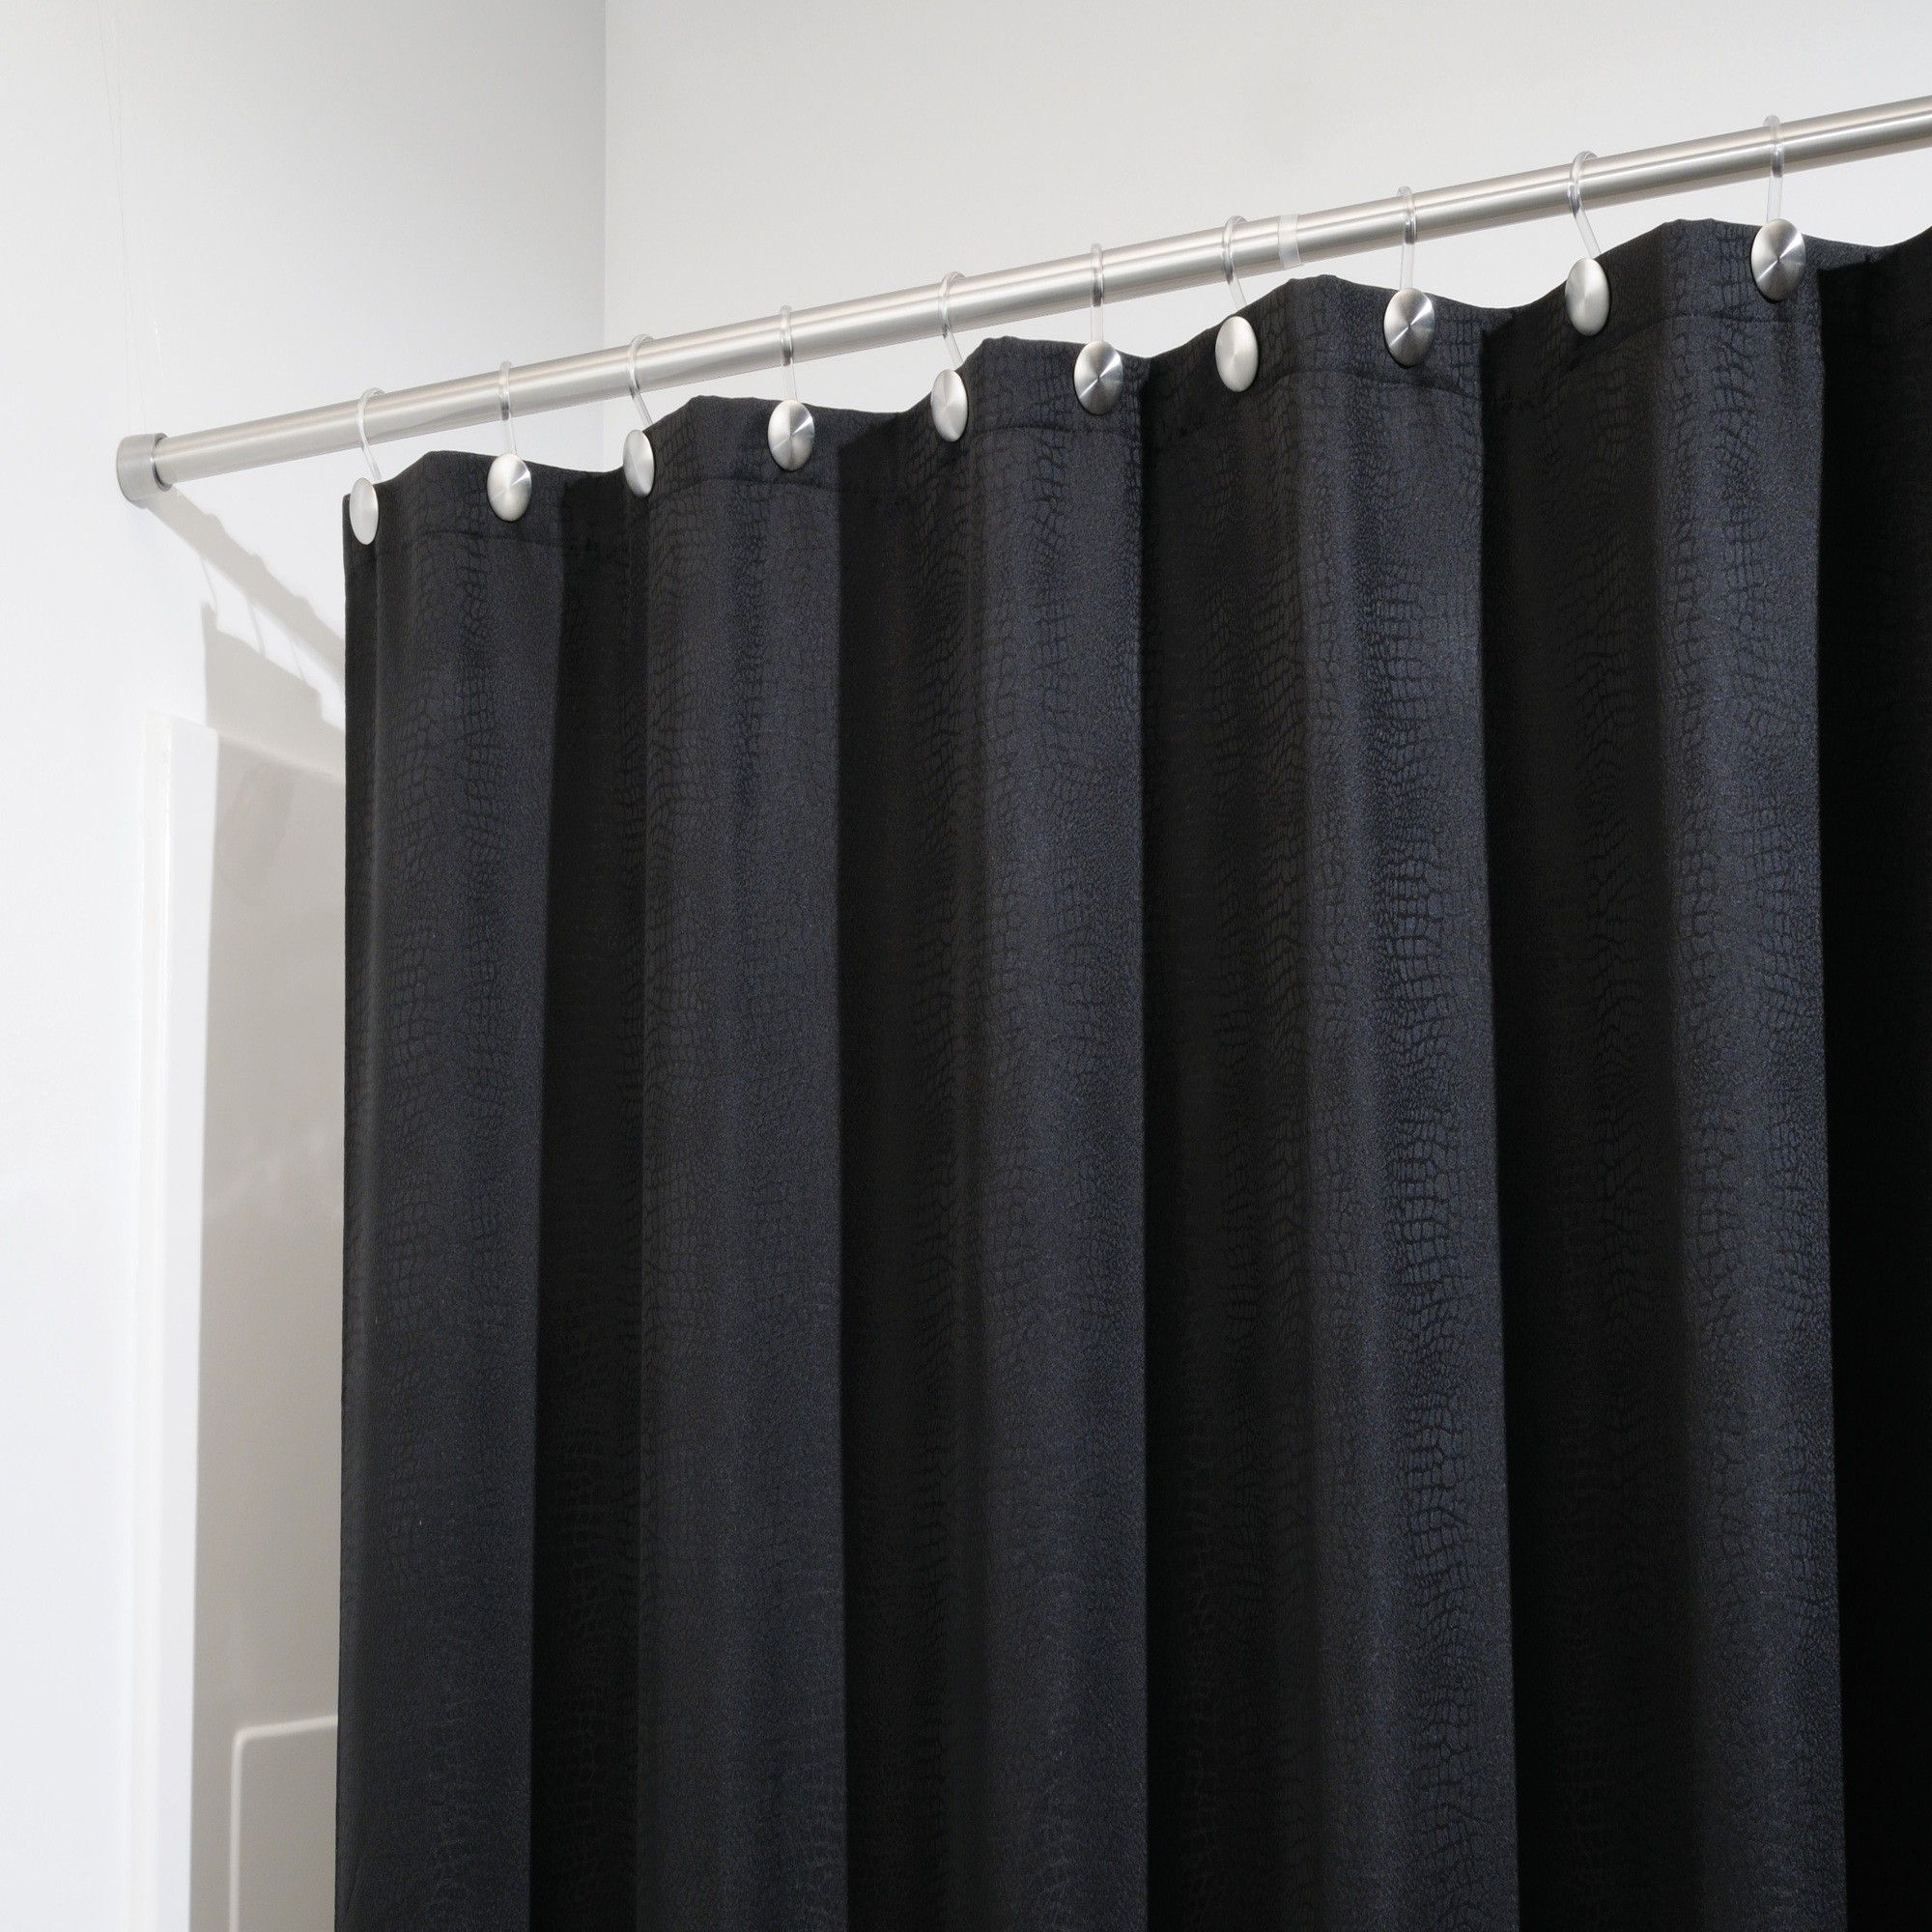 L Shaped Shower Curtain Rod Bed Bath And Beyond Curtain Inside L Curtain Rods (View 10 of 25)